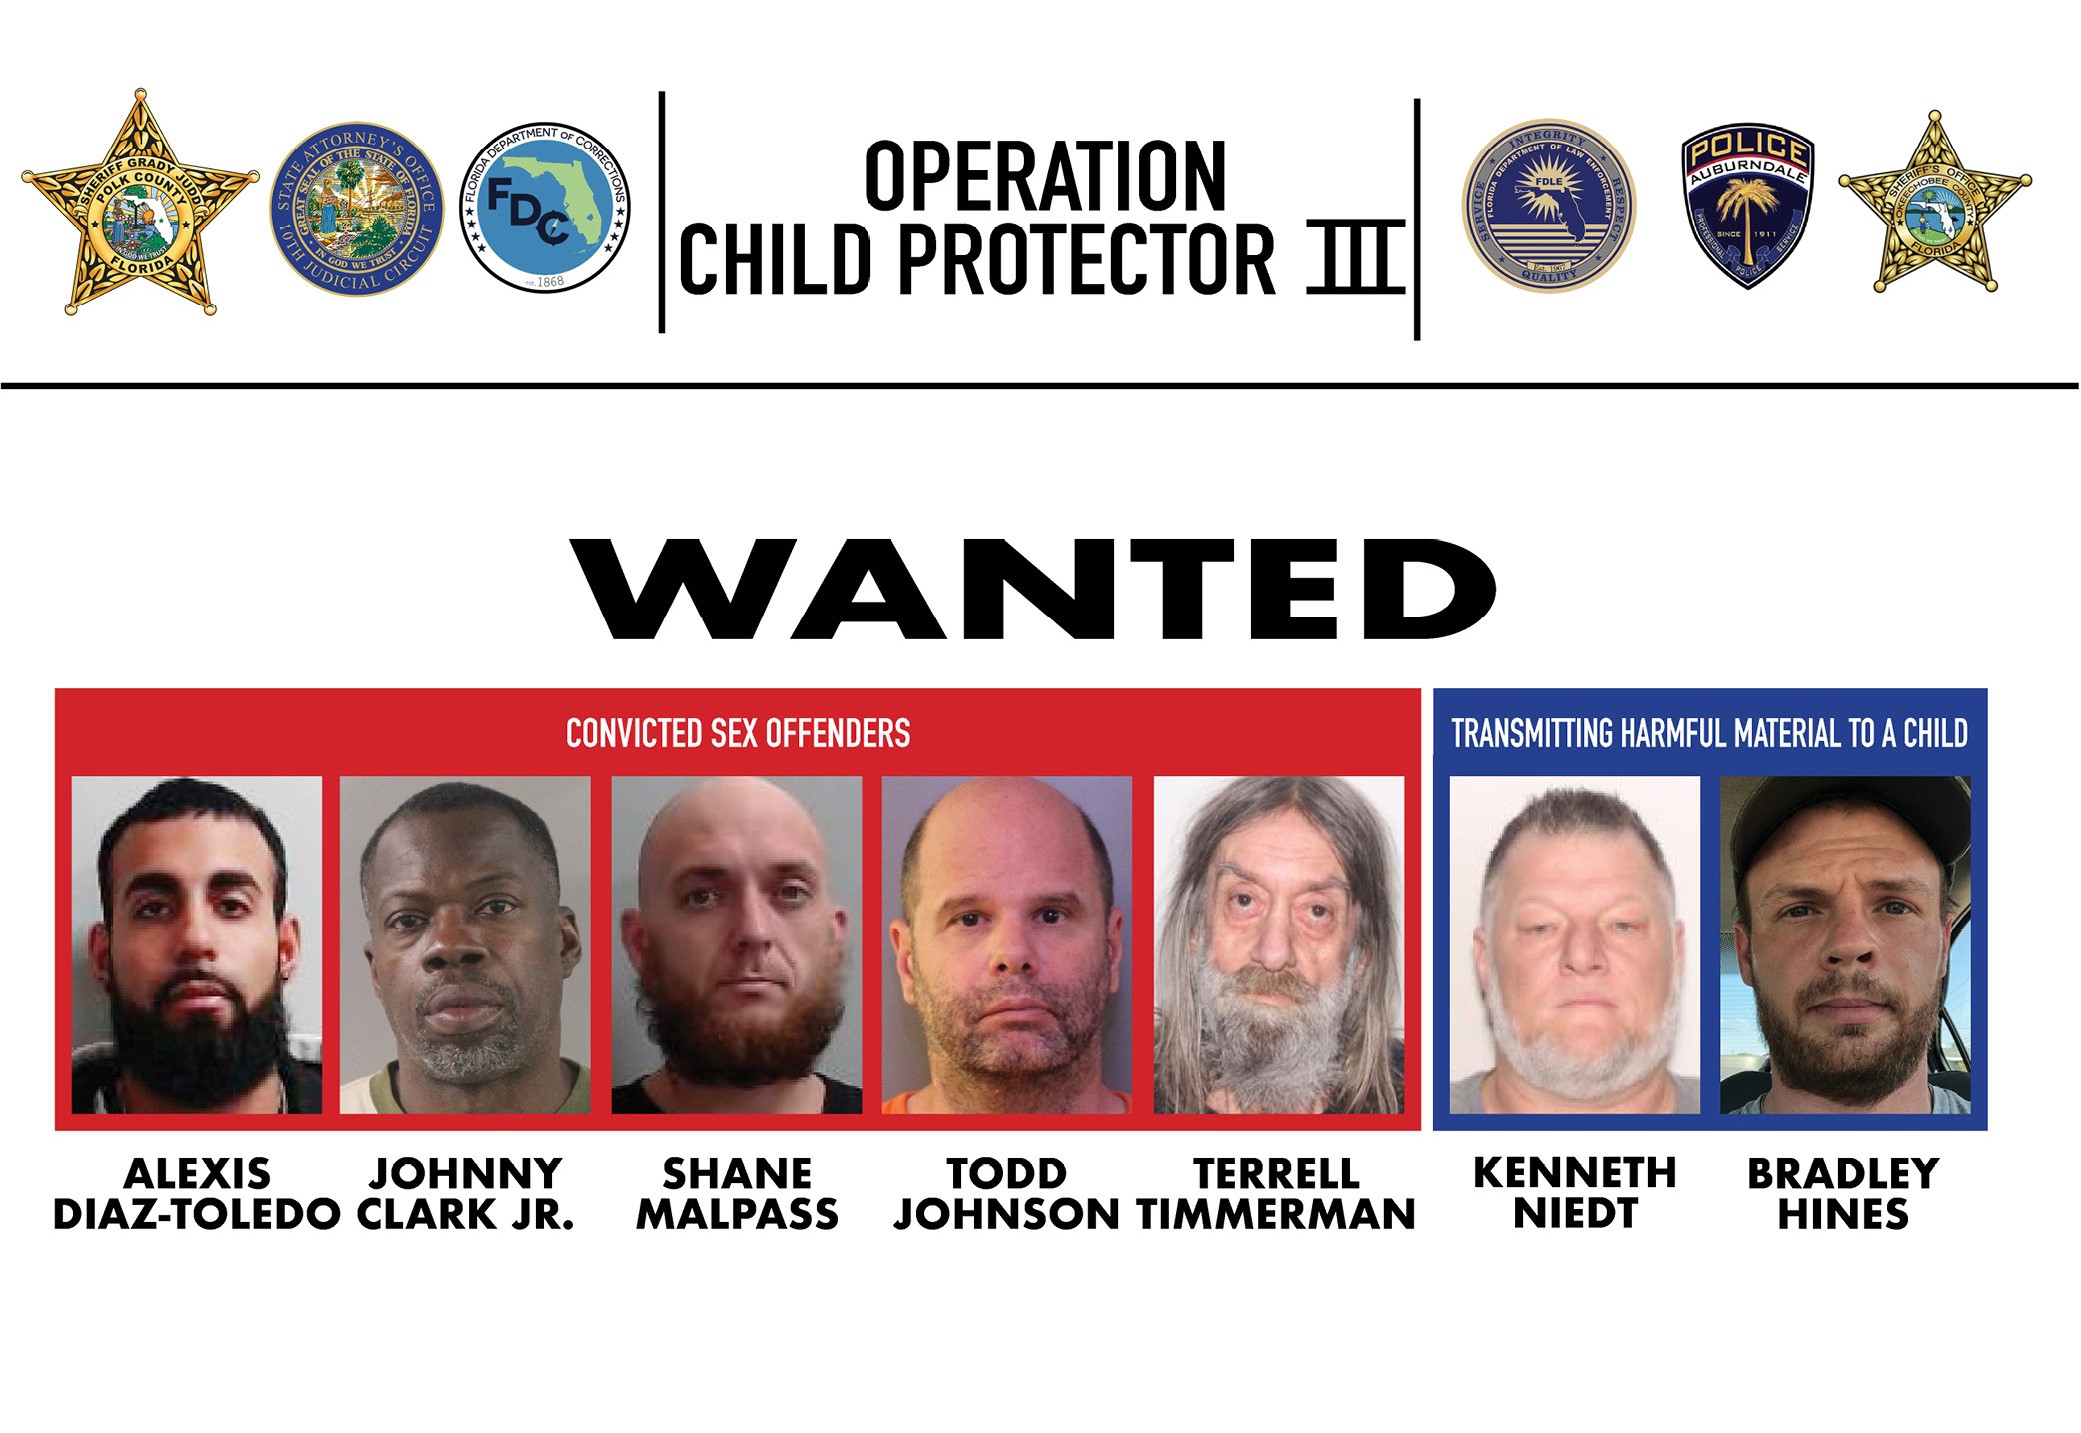 30 suspects arrested during investigation focused on protecting children from sexual offenders and predators image image